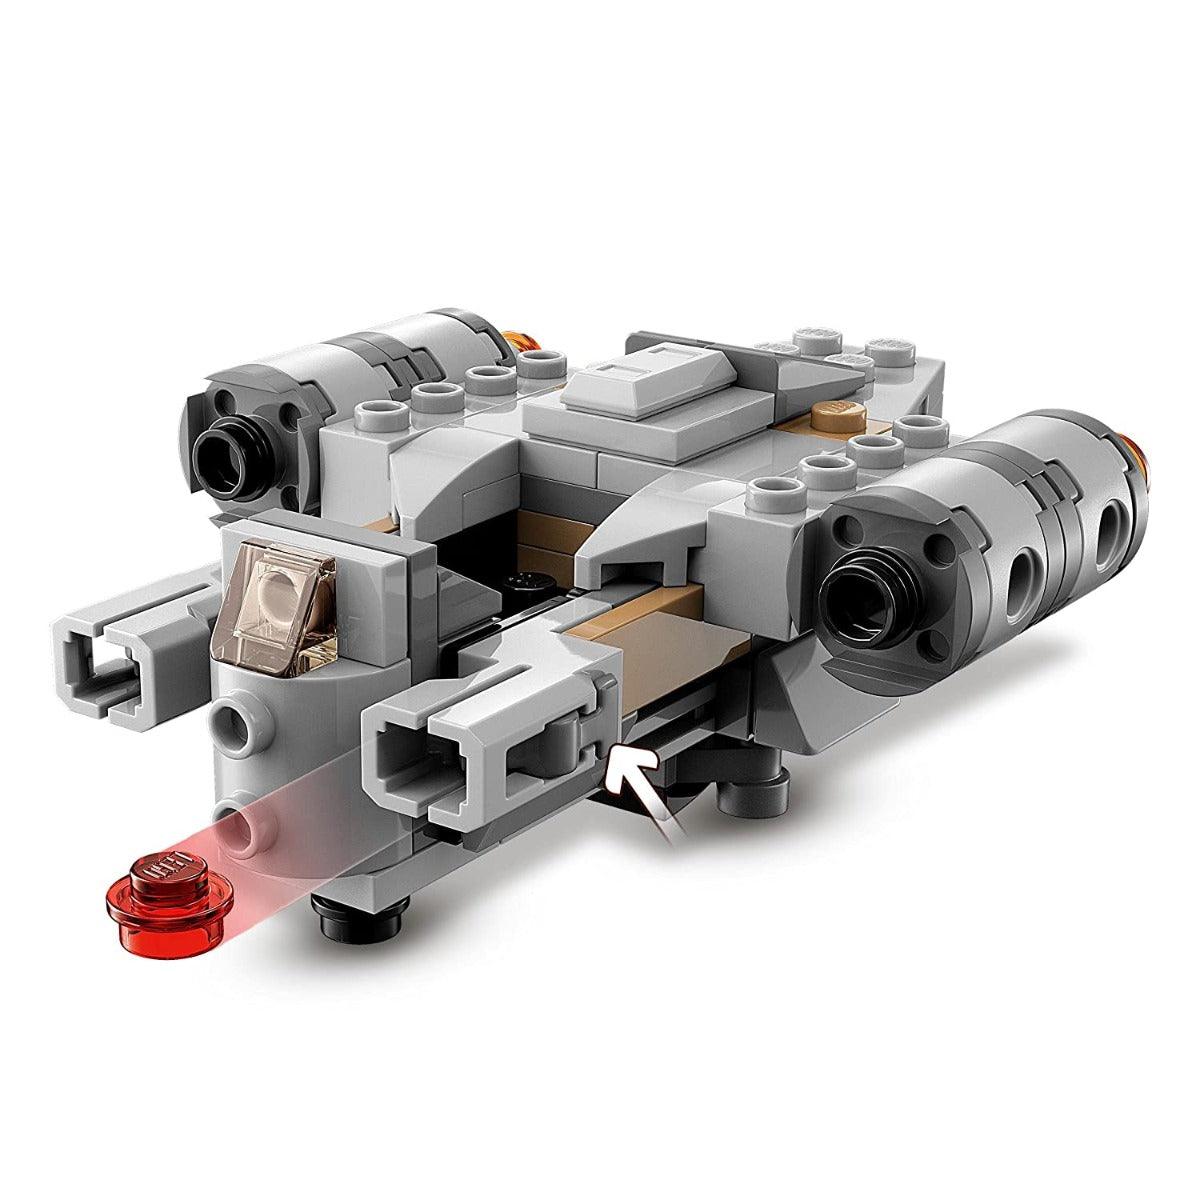 LEGO Star Wars The Razor Crest Microfighter Building Kit for Ages 6+